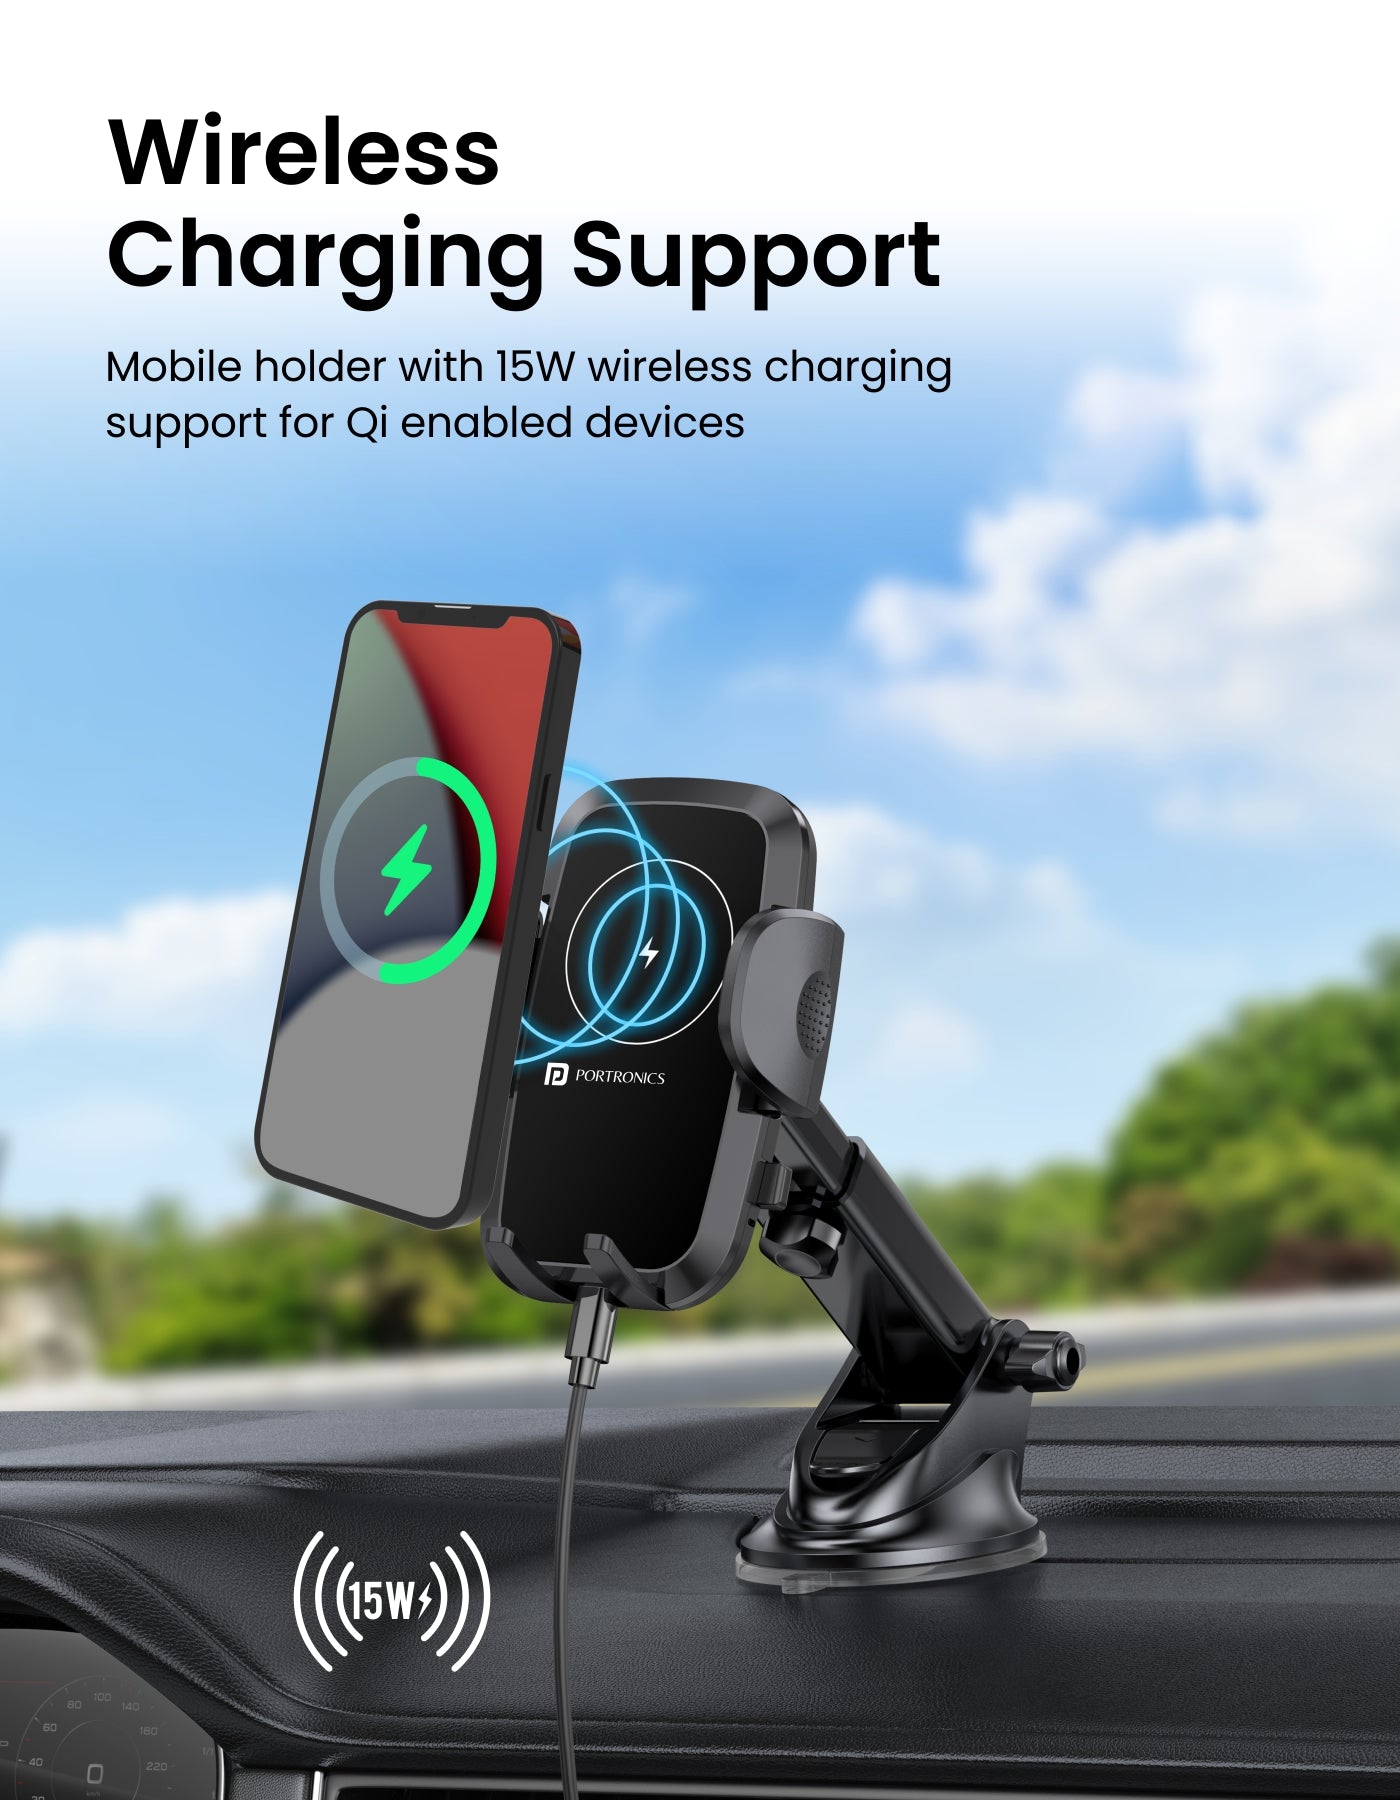 Portronics Charge Clamp 2 Mobile Holder for car with wireless charging